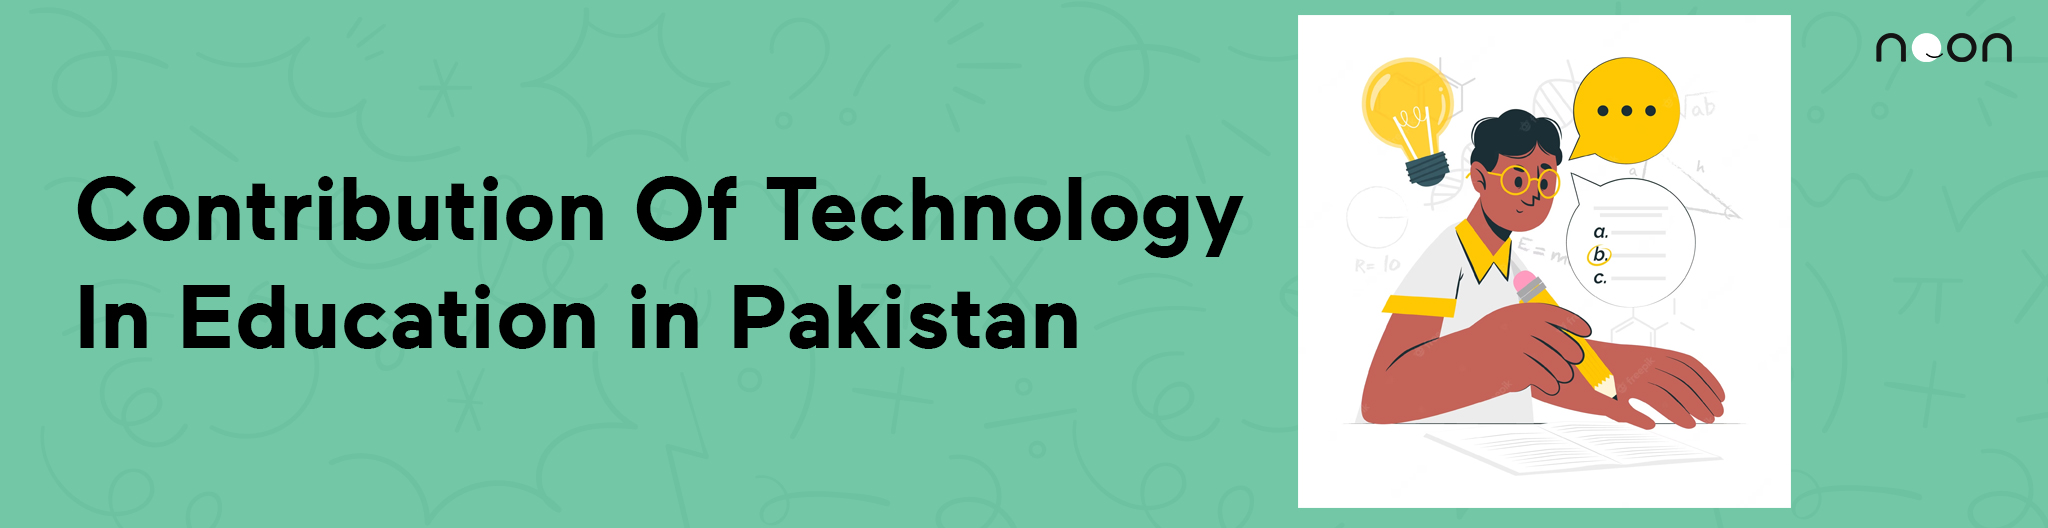 Contribution Of Technology In Education in Pakistan